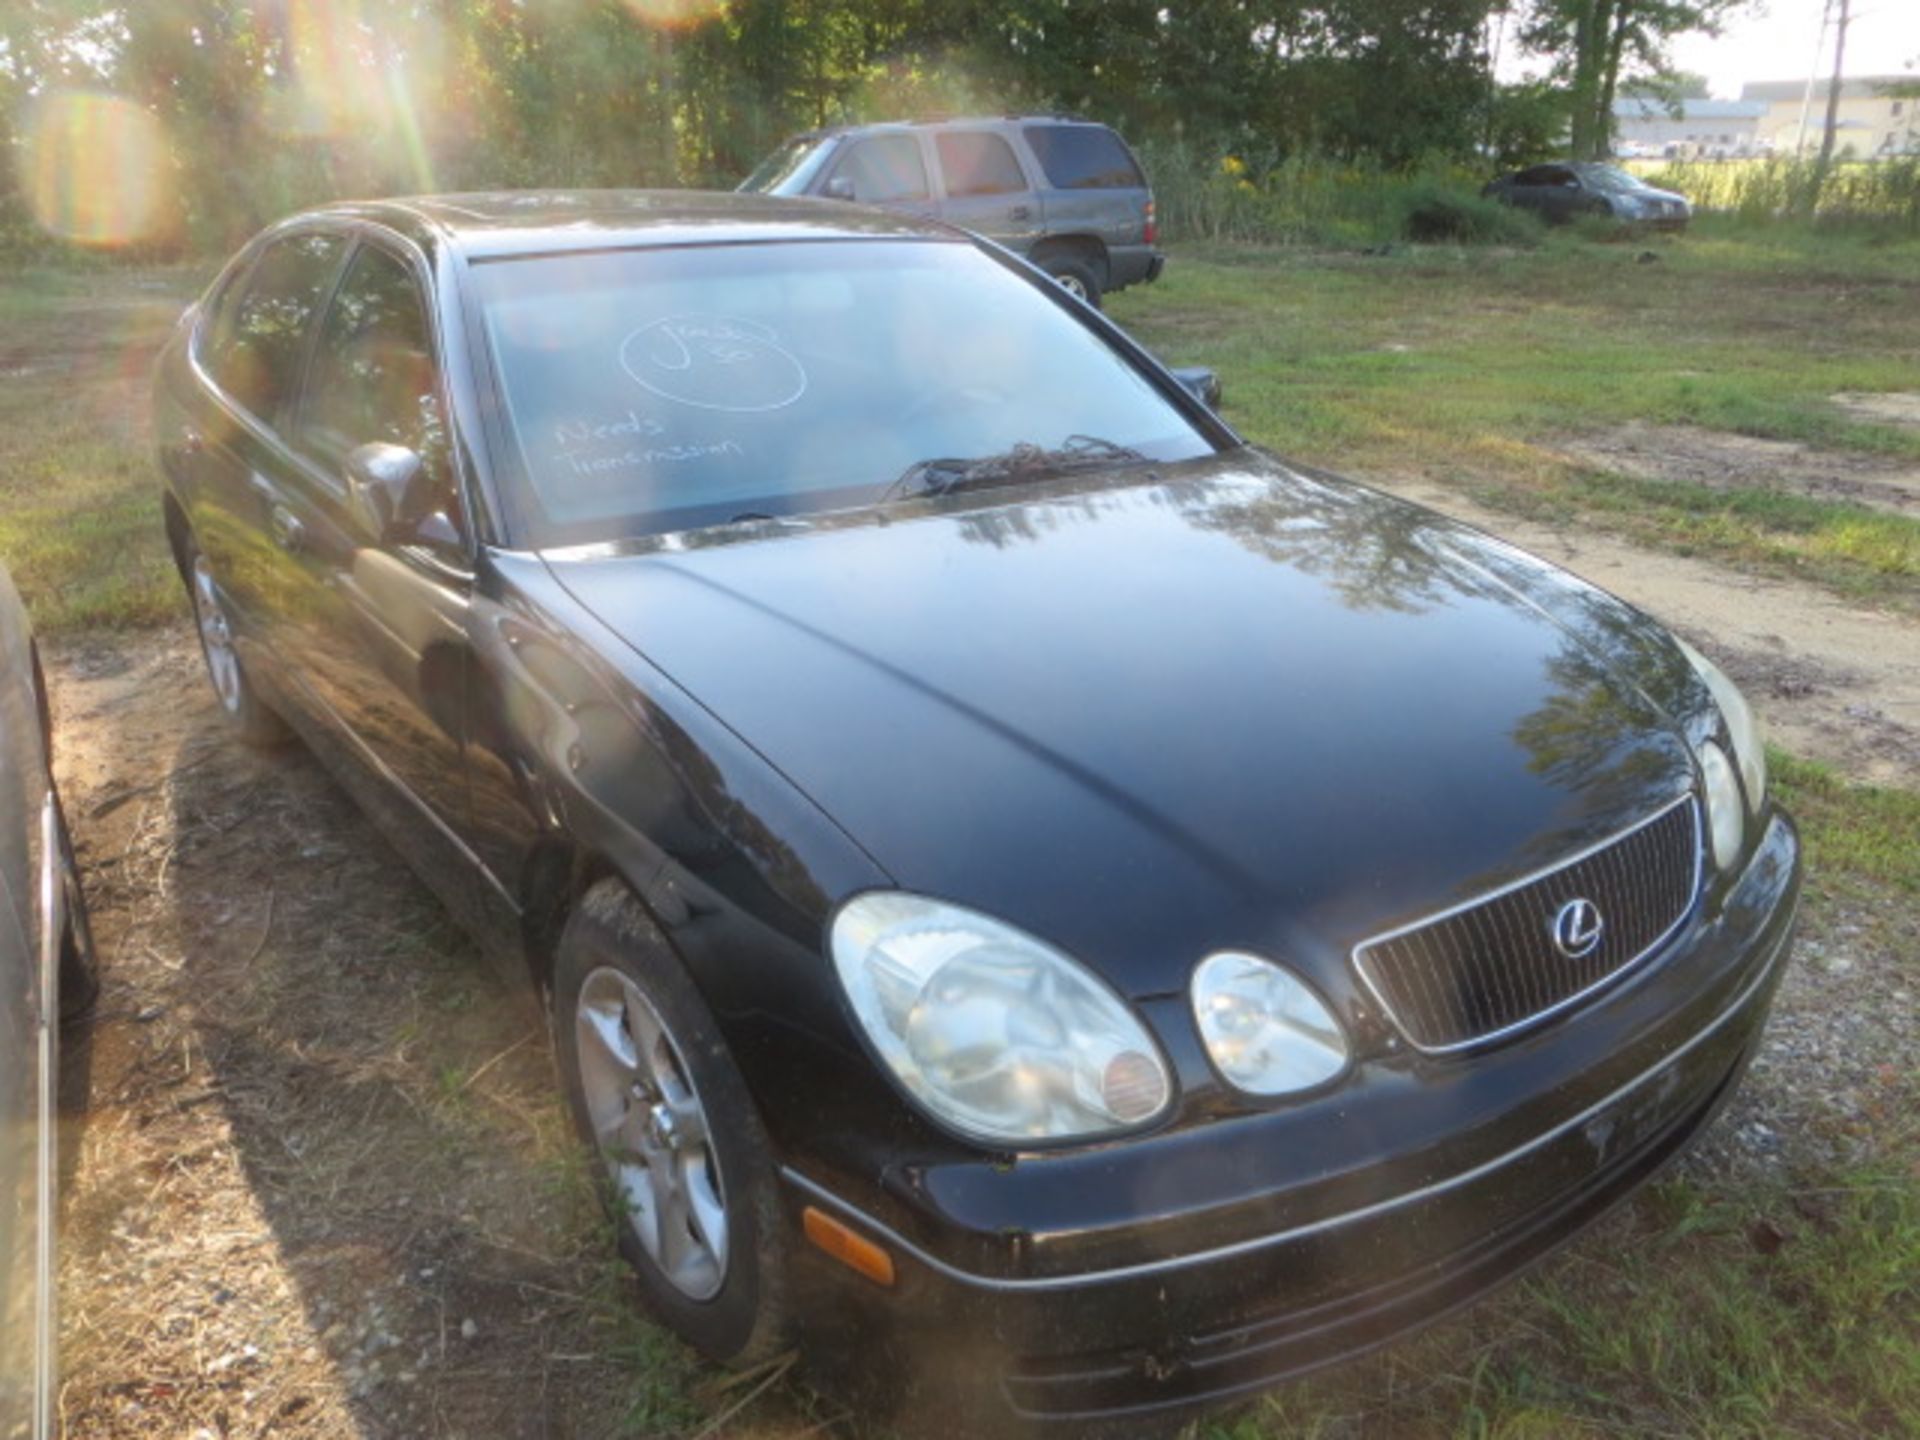 1999 Lexus GS300 187000 MILES,VIN JT8BD68SXX00568417, SOLD WITH GOOD TRANSFERABLE TITLE, ALL VEHICLE - Image 2 of 4